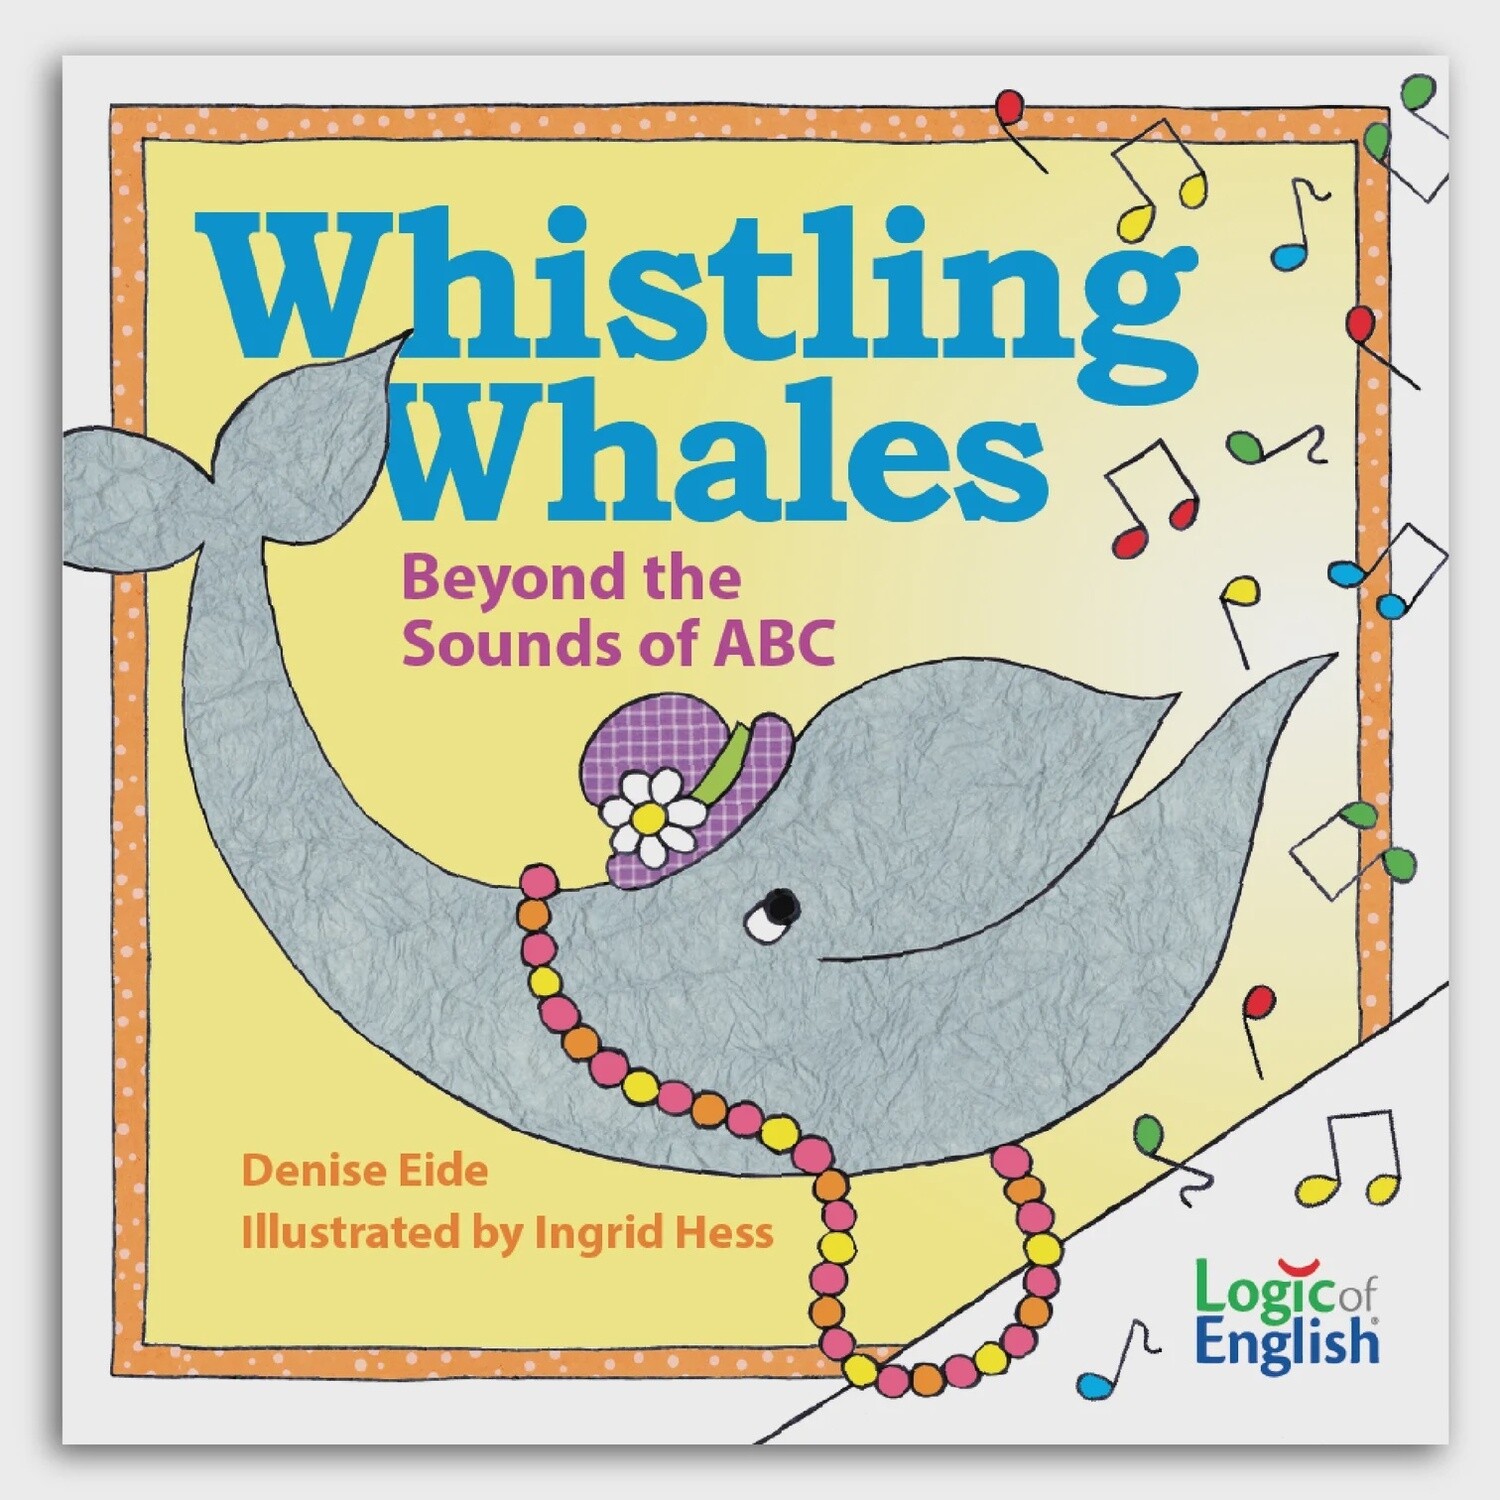 Used Logic of English Whistling Whales